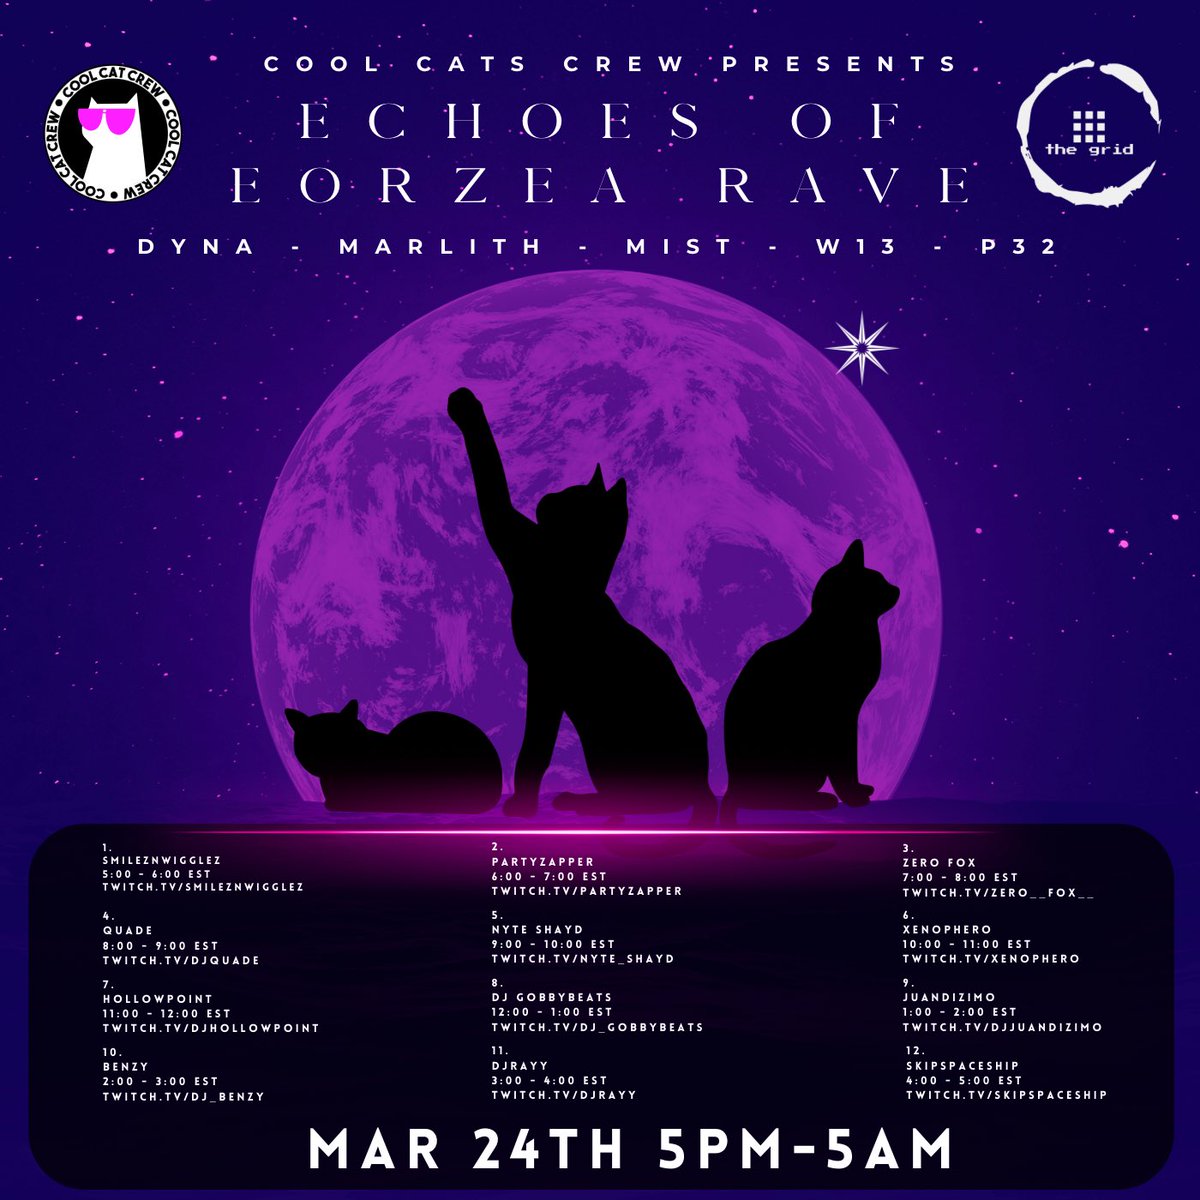 🎉 Get ready to dance the night away at the Echoes Of Eorzea Rave in Final Fantasy 14! 🌟 Join us on March 24th from 5PM to 5AM EST at The Grid club located at Dyna - Marlith - Mist - W13 P32! Let's light up the night with music, friends, and unforgettable moments! #EorzeaRave